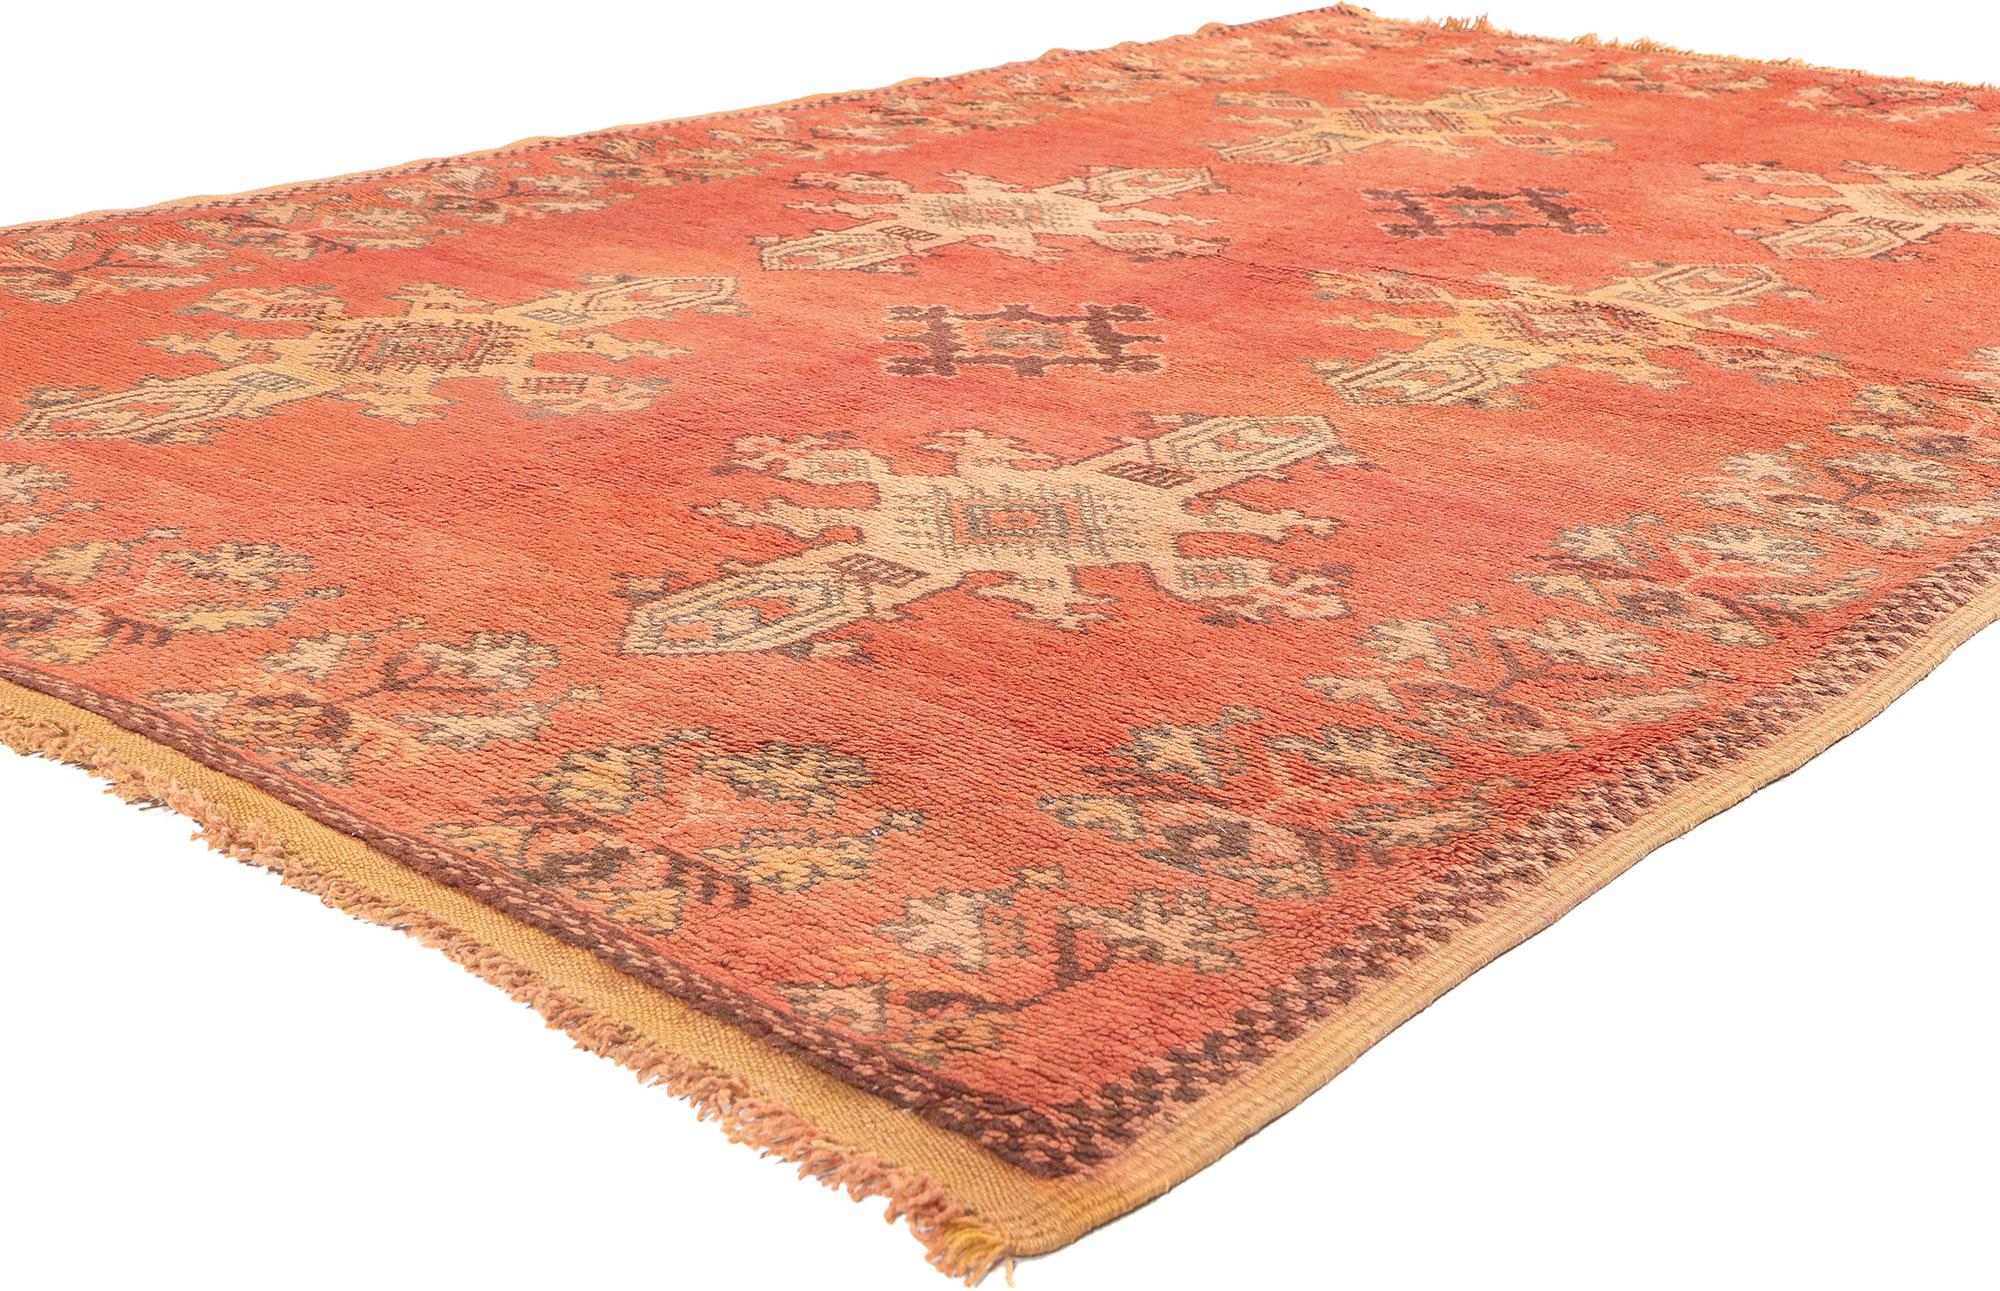 20231 Vintage Taznakht Moroccan Rug, 05'09 x 09'01.
Immerse yourself in the rich heritage of the Taznakht Tribe, skillfully crafting this hand-knotted wool vintage Berber Moroccan rug in the High Atlas Mountains of southern Morocco. This captivating